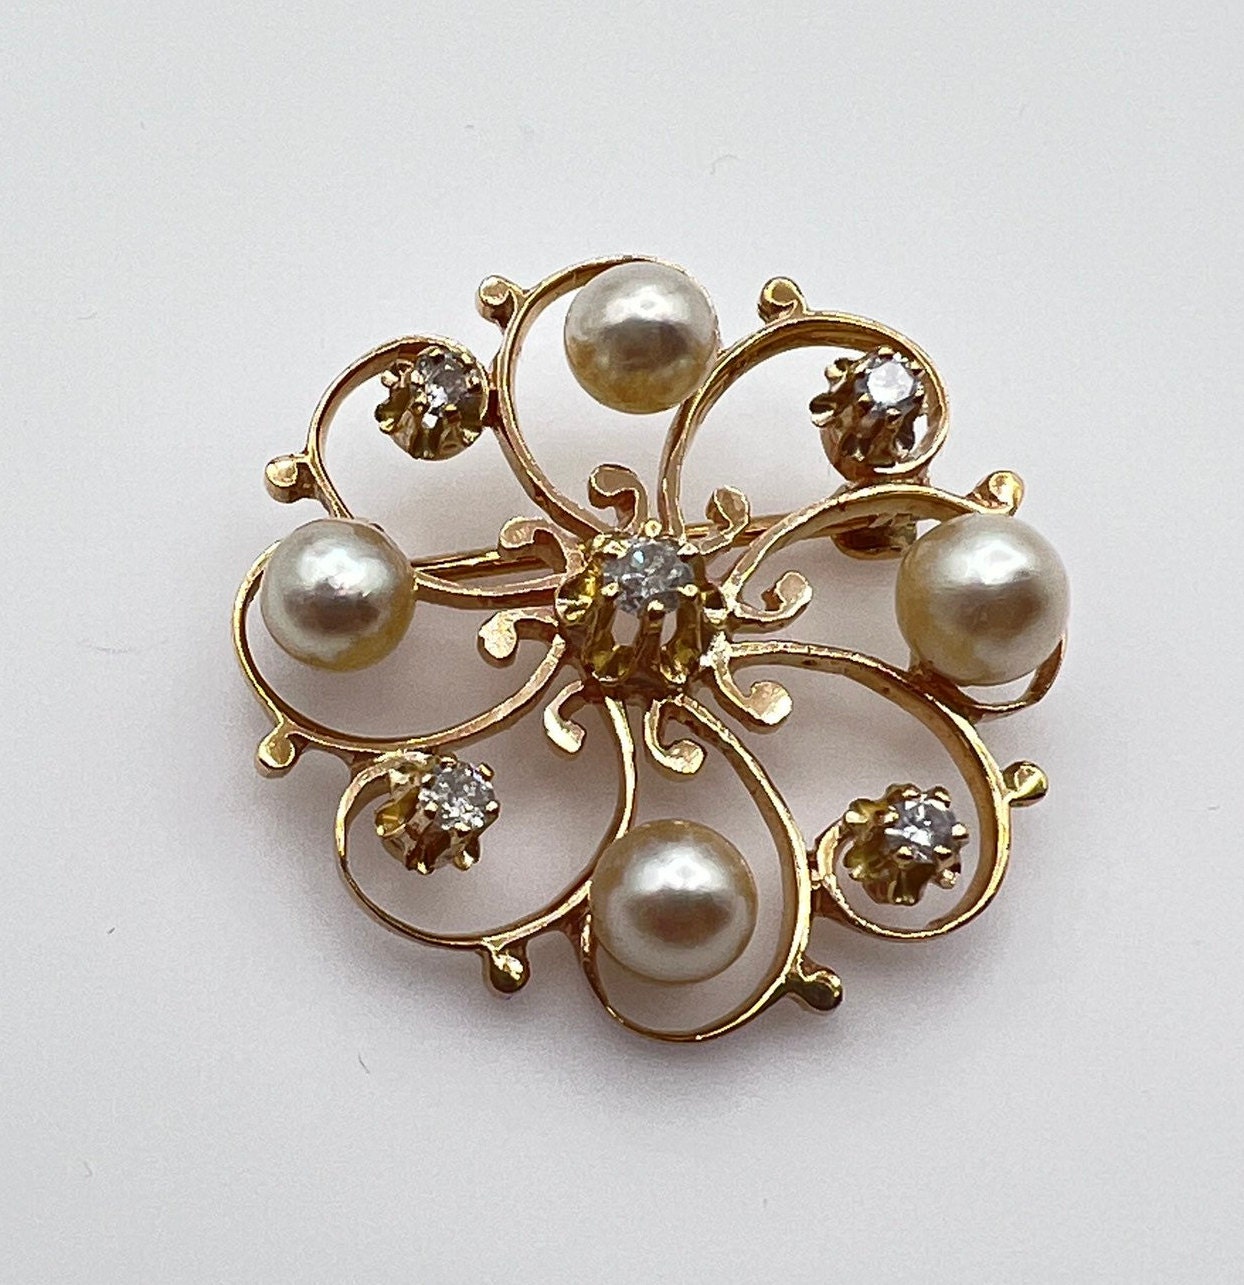 Vintage Collection Sterling Cultured Pearl Pins Brooches - Ruby Lane